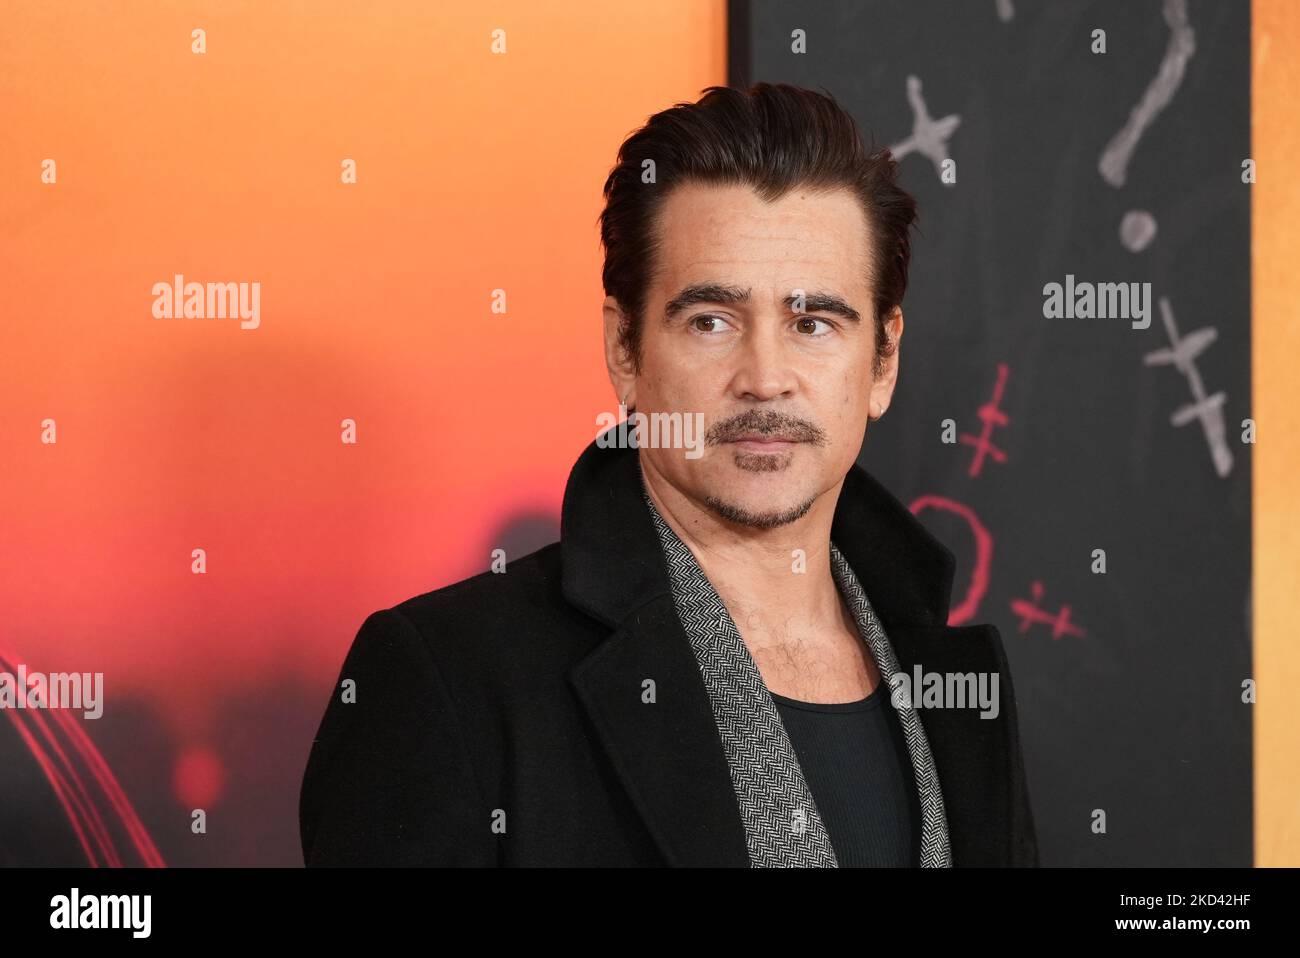 Colin Farrell attend the world premiere of 'The Batman' at Lincoln Center Josie Robertson Plaza on Tuesday, March 1, 2022, in New York. (Photo by John Nacion/NurPhoto) Stock Photo